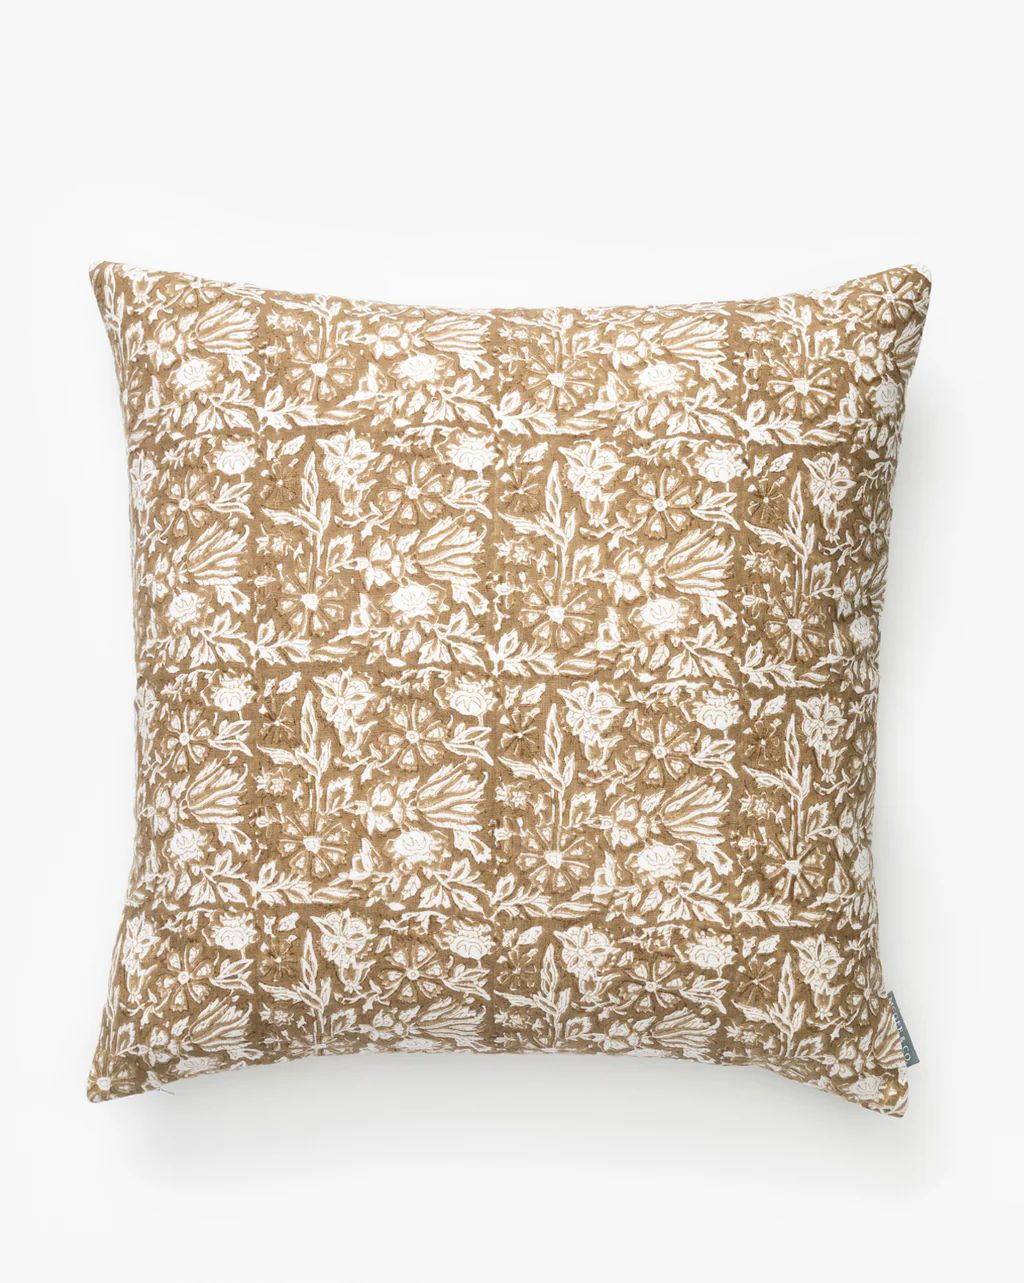 Jentry Block Print Pillow Cover | McGee & Co. (US)